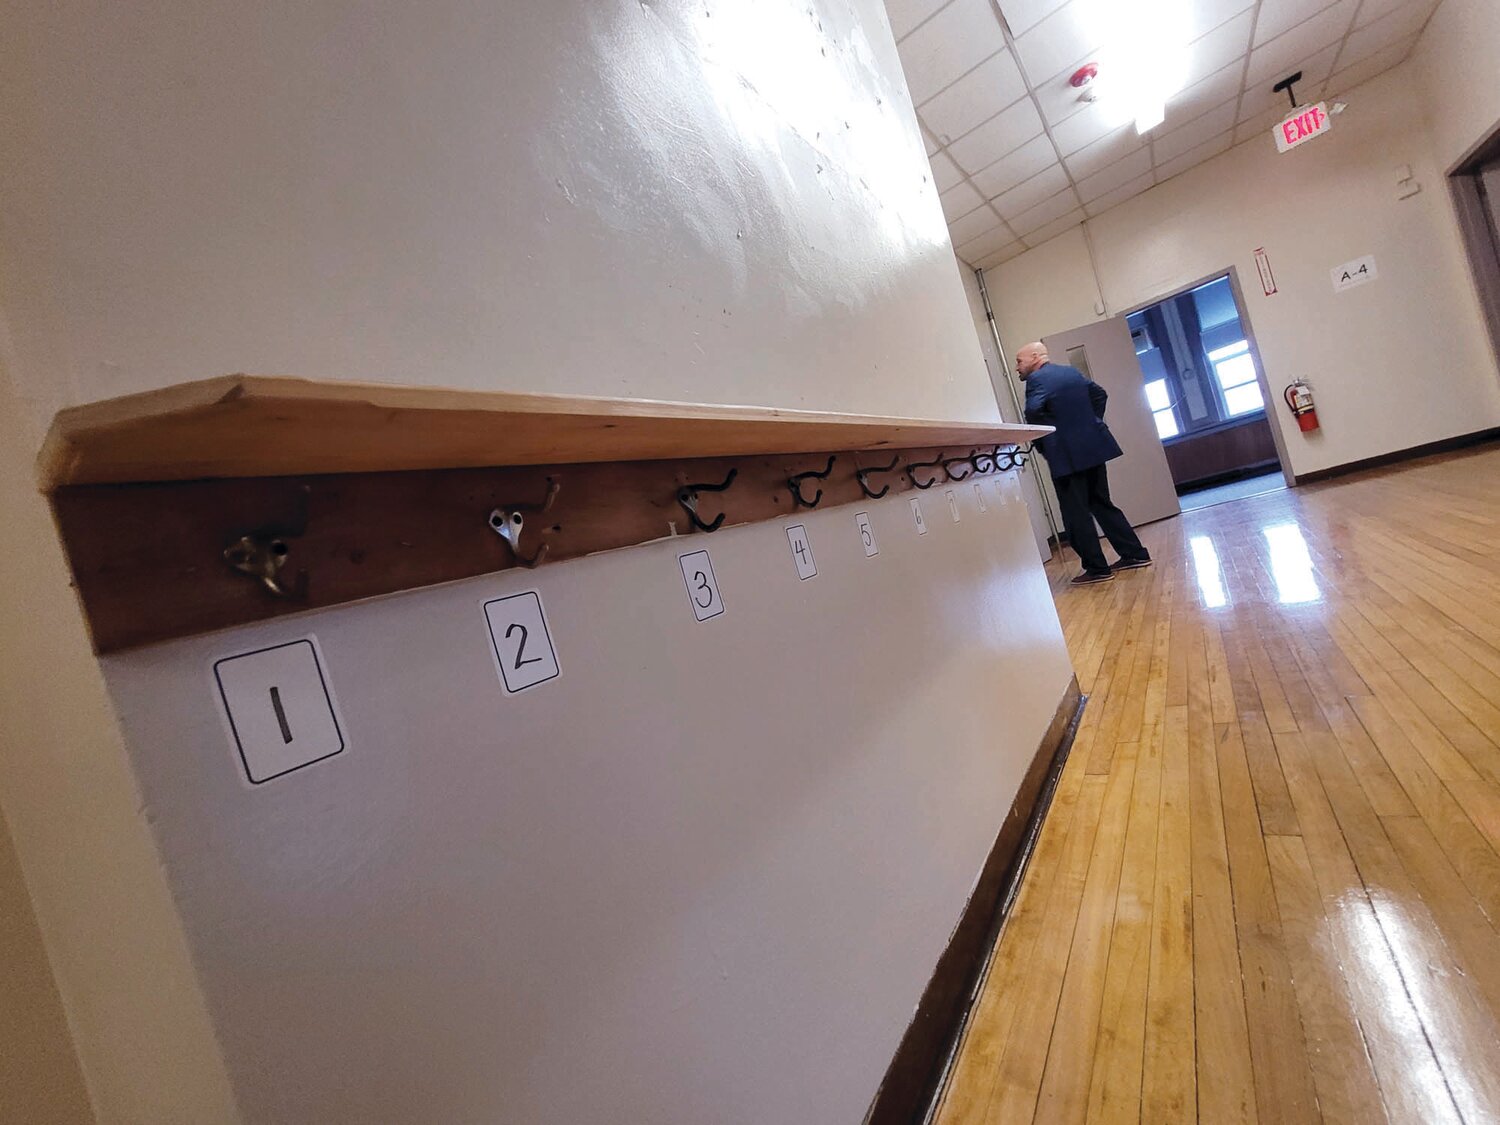 TENDER HOOKS: Tri-County President & CEO Joe DeSantis recently gave a tour of the agency’s newest acquisition, Johnston’s George C. Calef Elementary School at 7 Waveland St. Tri-County paid the town $1 million in cash for the building.